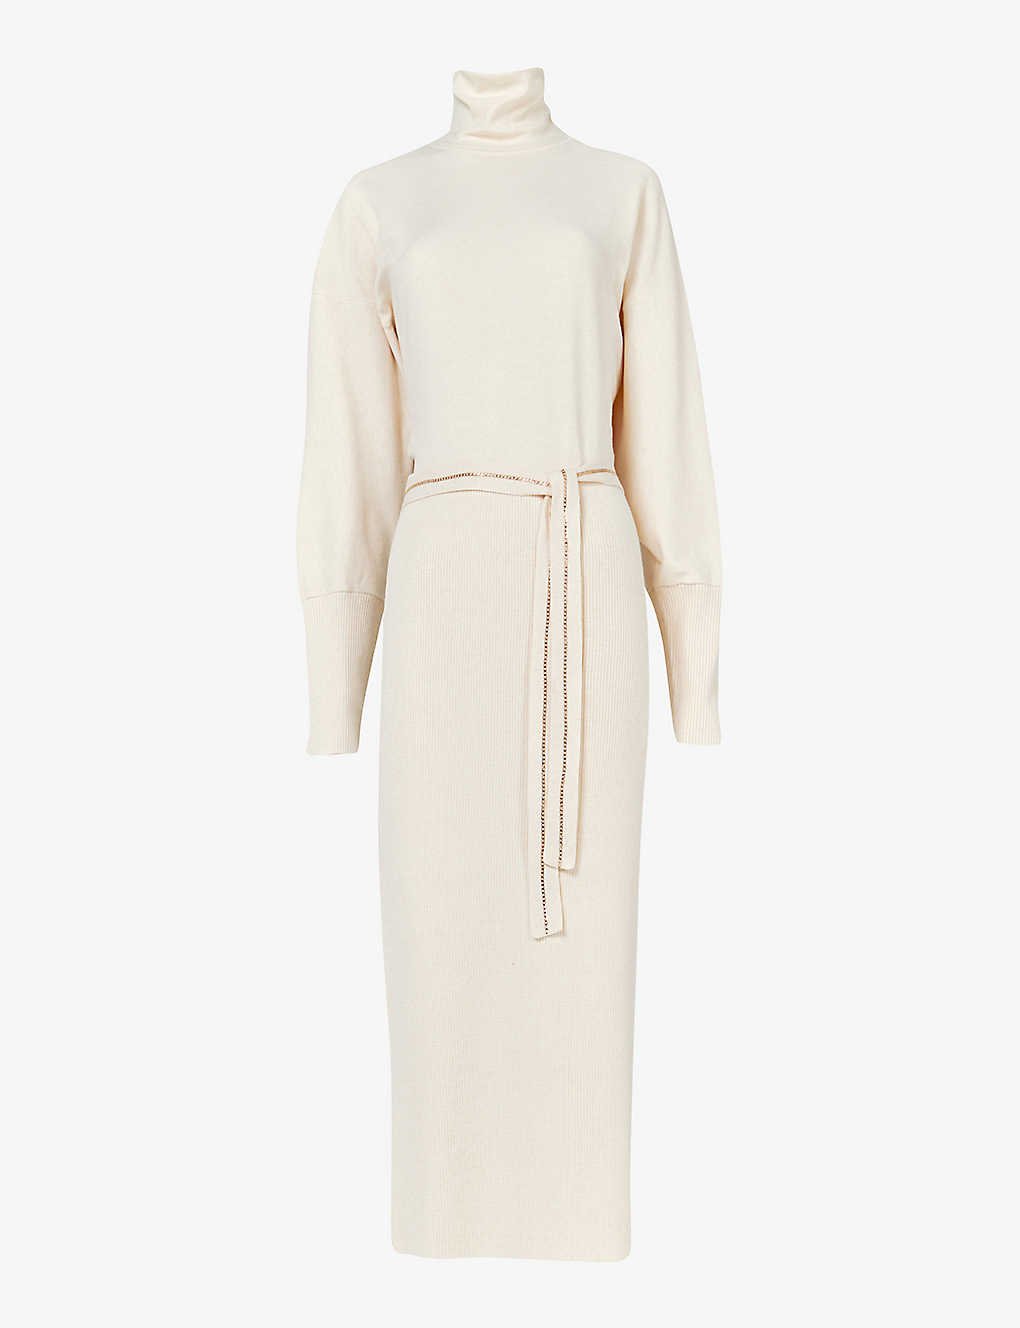 Leem Womens Off White High-neck Belted Knitted Midi Dress